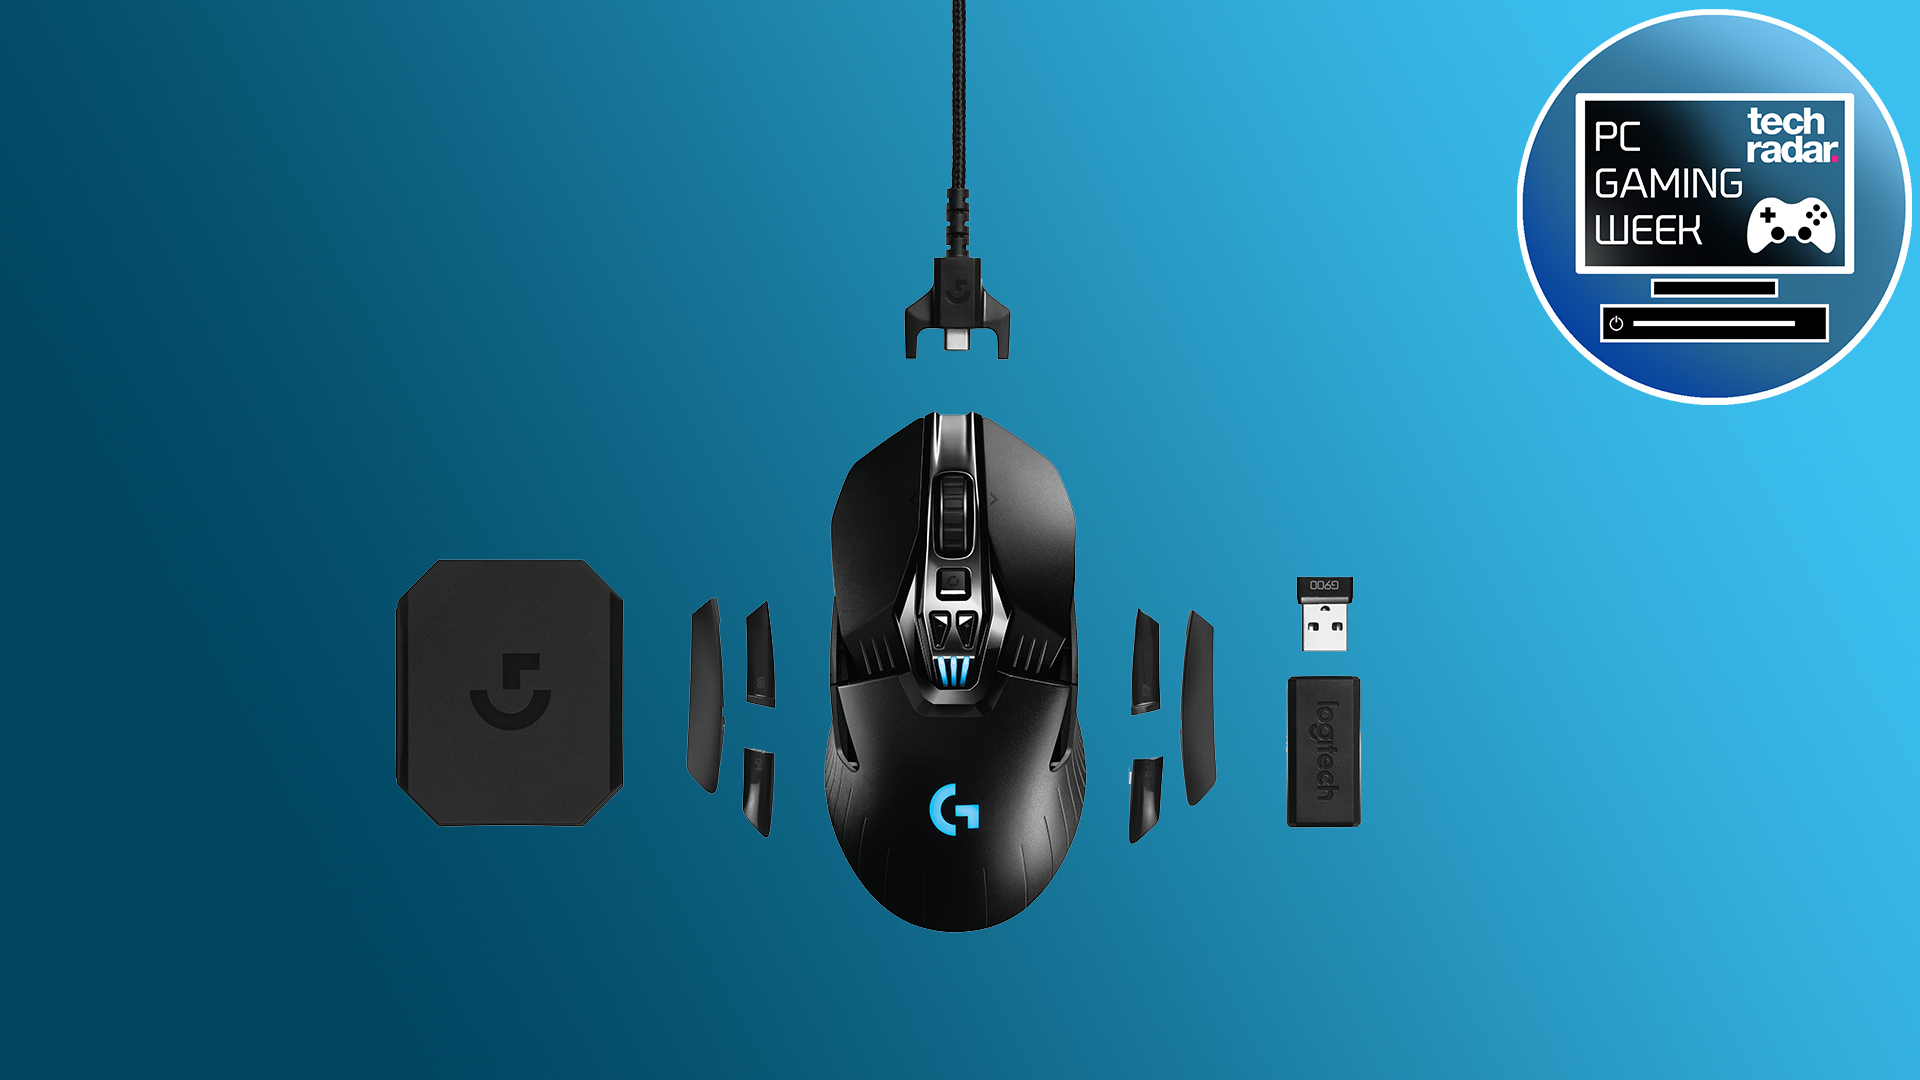 Inside The Extreme Science Logitech Uses To Build Gaming Mice Techradar